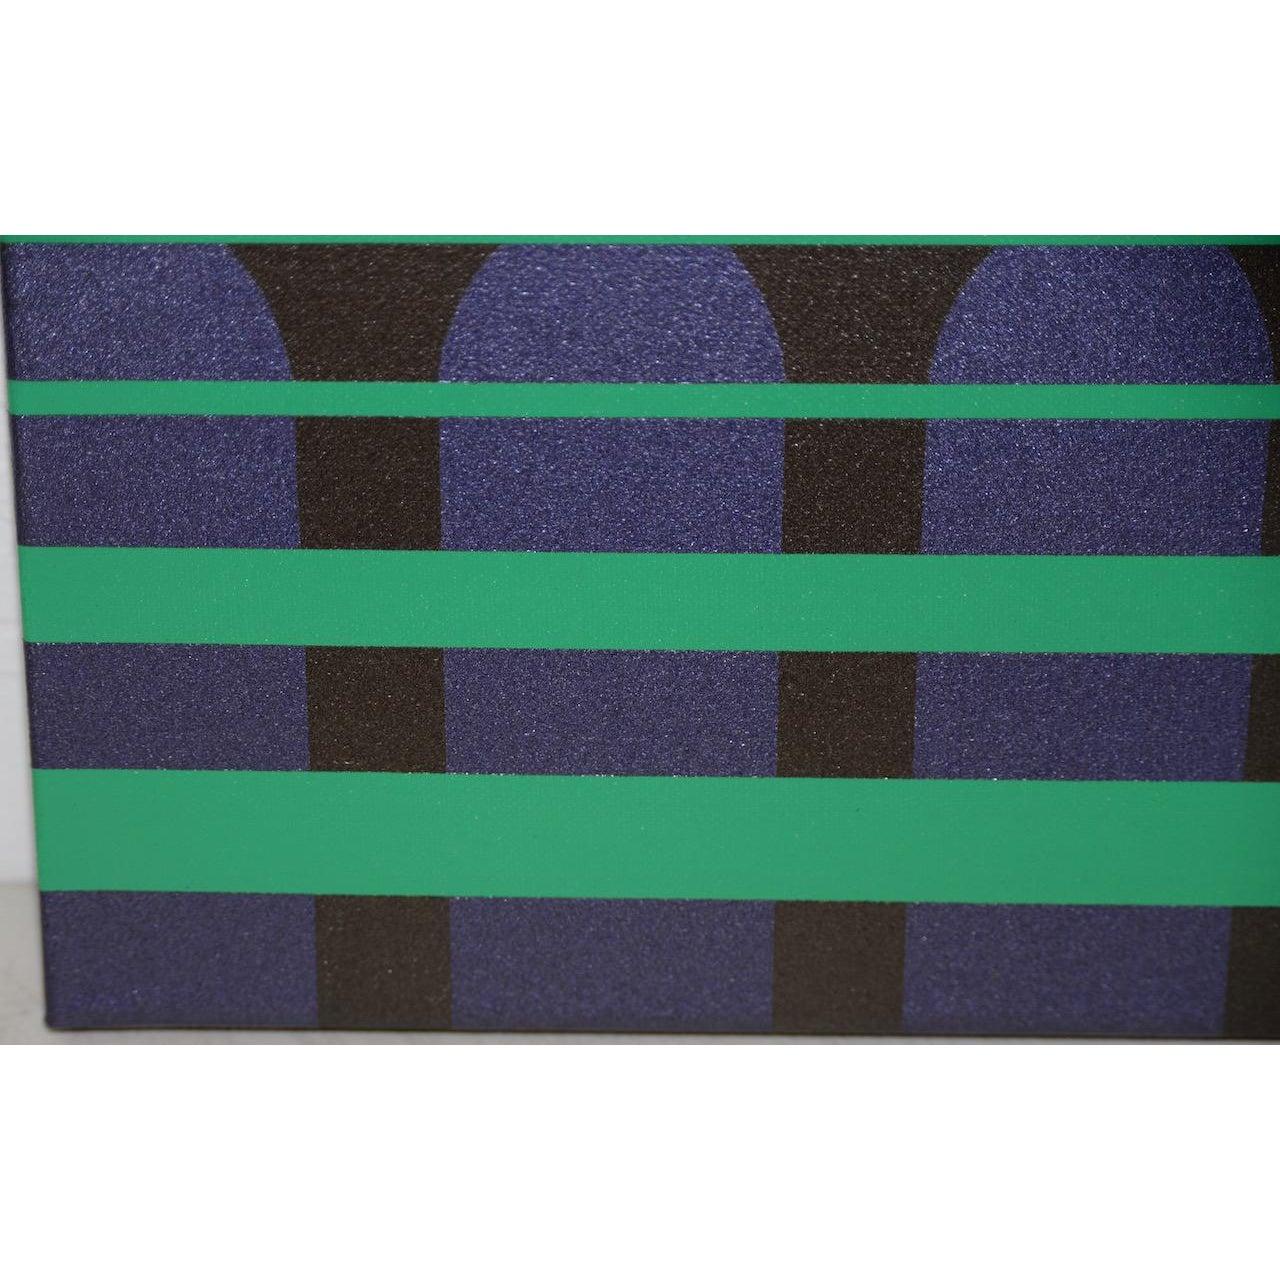 American Charles Hersey Vintage Acrylic Op-Art Painting, circa 1971 For Sale